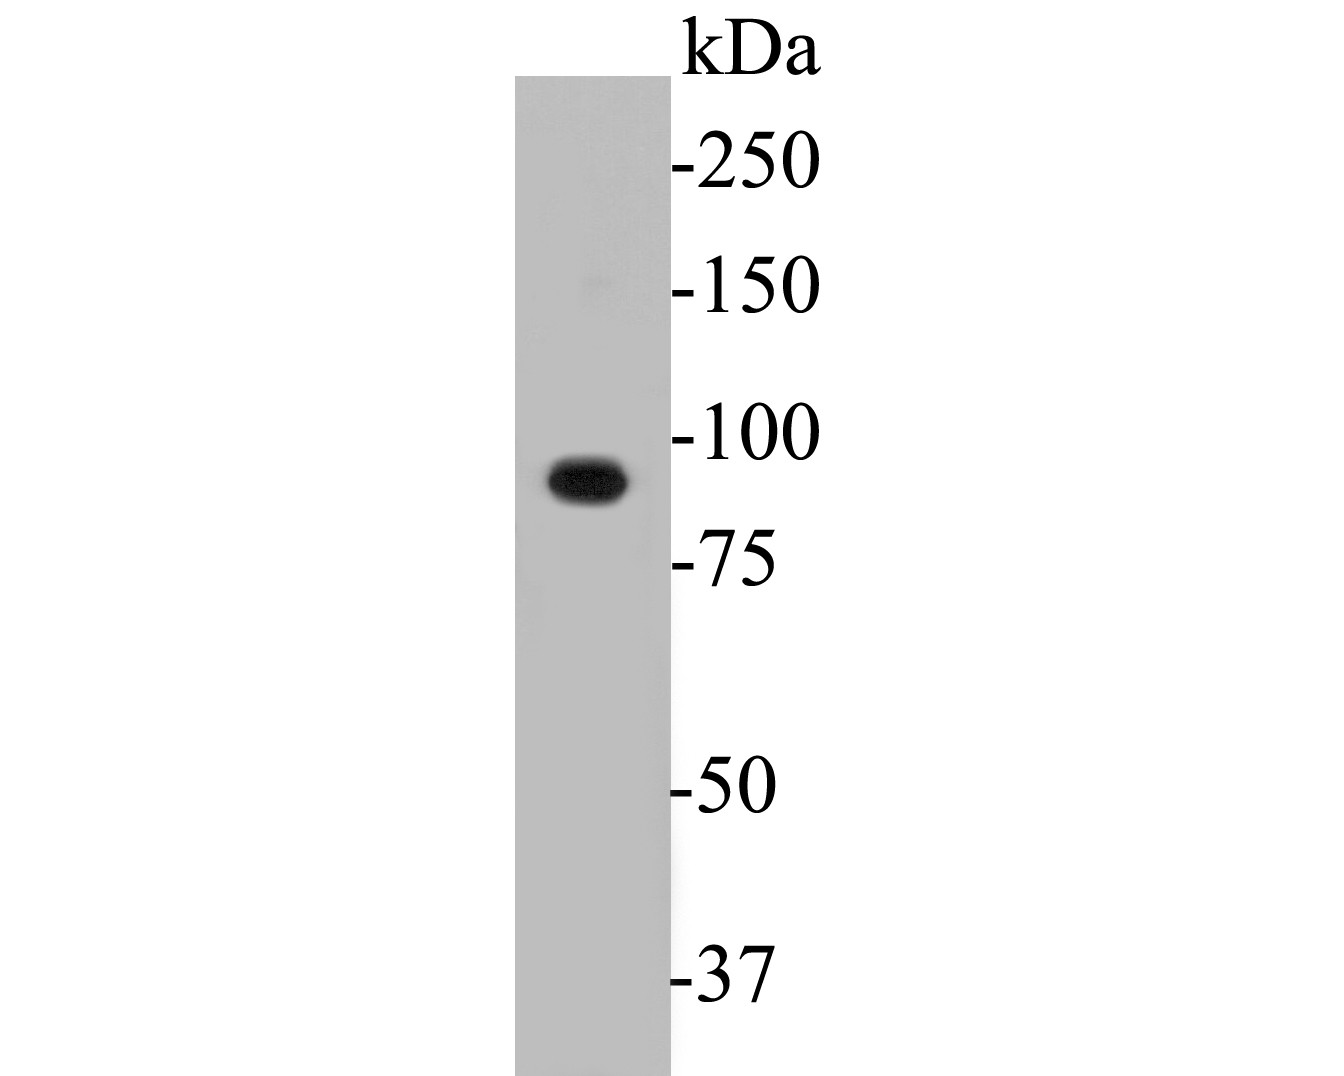 Western blot analysis of DOG1 on PC-3M cell lysates. Proteins were transferred to a PVDF membrane and blocked with 5% BSA in PBS for 1 hour at room temperature. The primary antibody (ER1901-30, 1/500) was used in 5% BSA at room temperature for 2 hours. Goat Anti-Rabbit IgG - HRP Secondary Antibody (HA1001) at 1:5,000 dilution was used for 1 hour at room temperature.